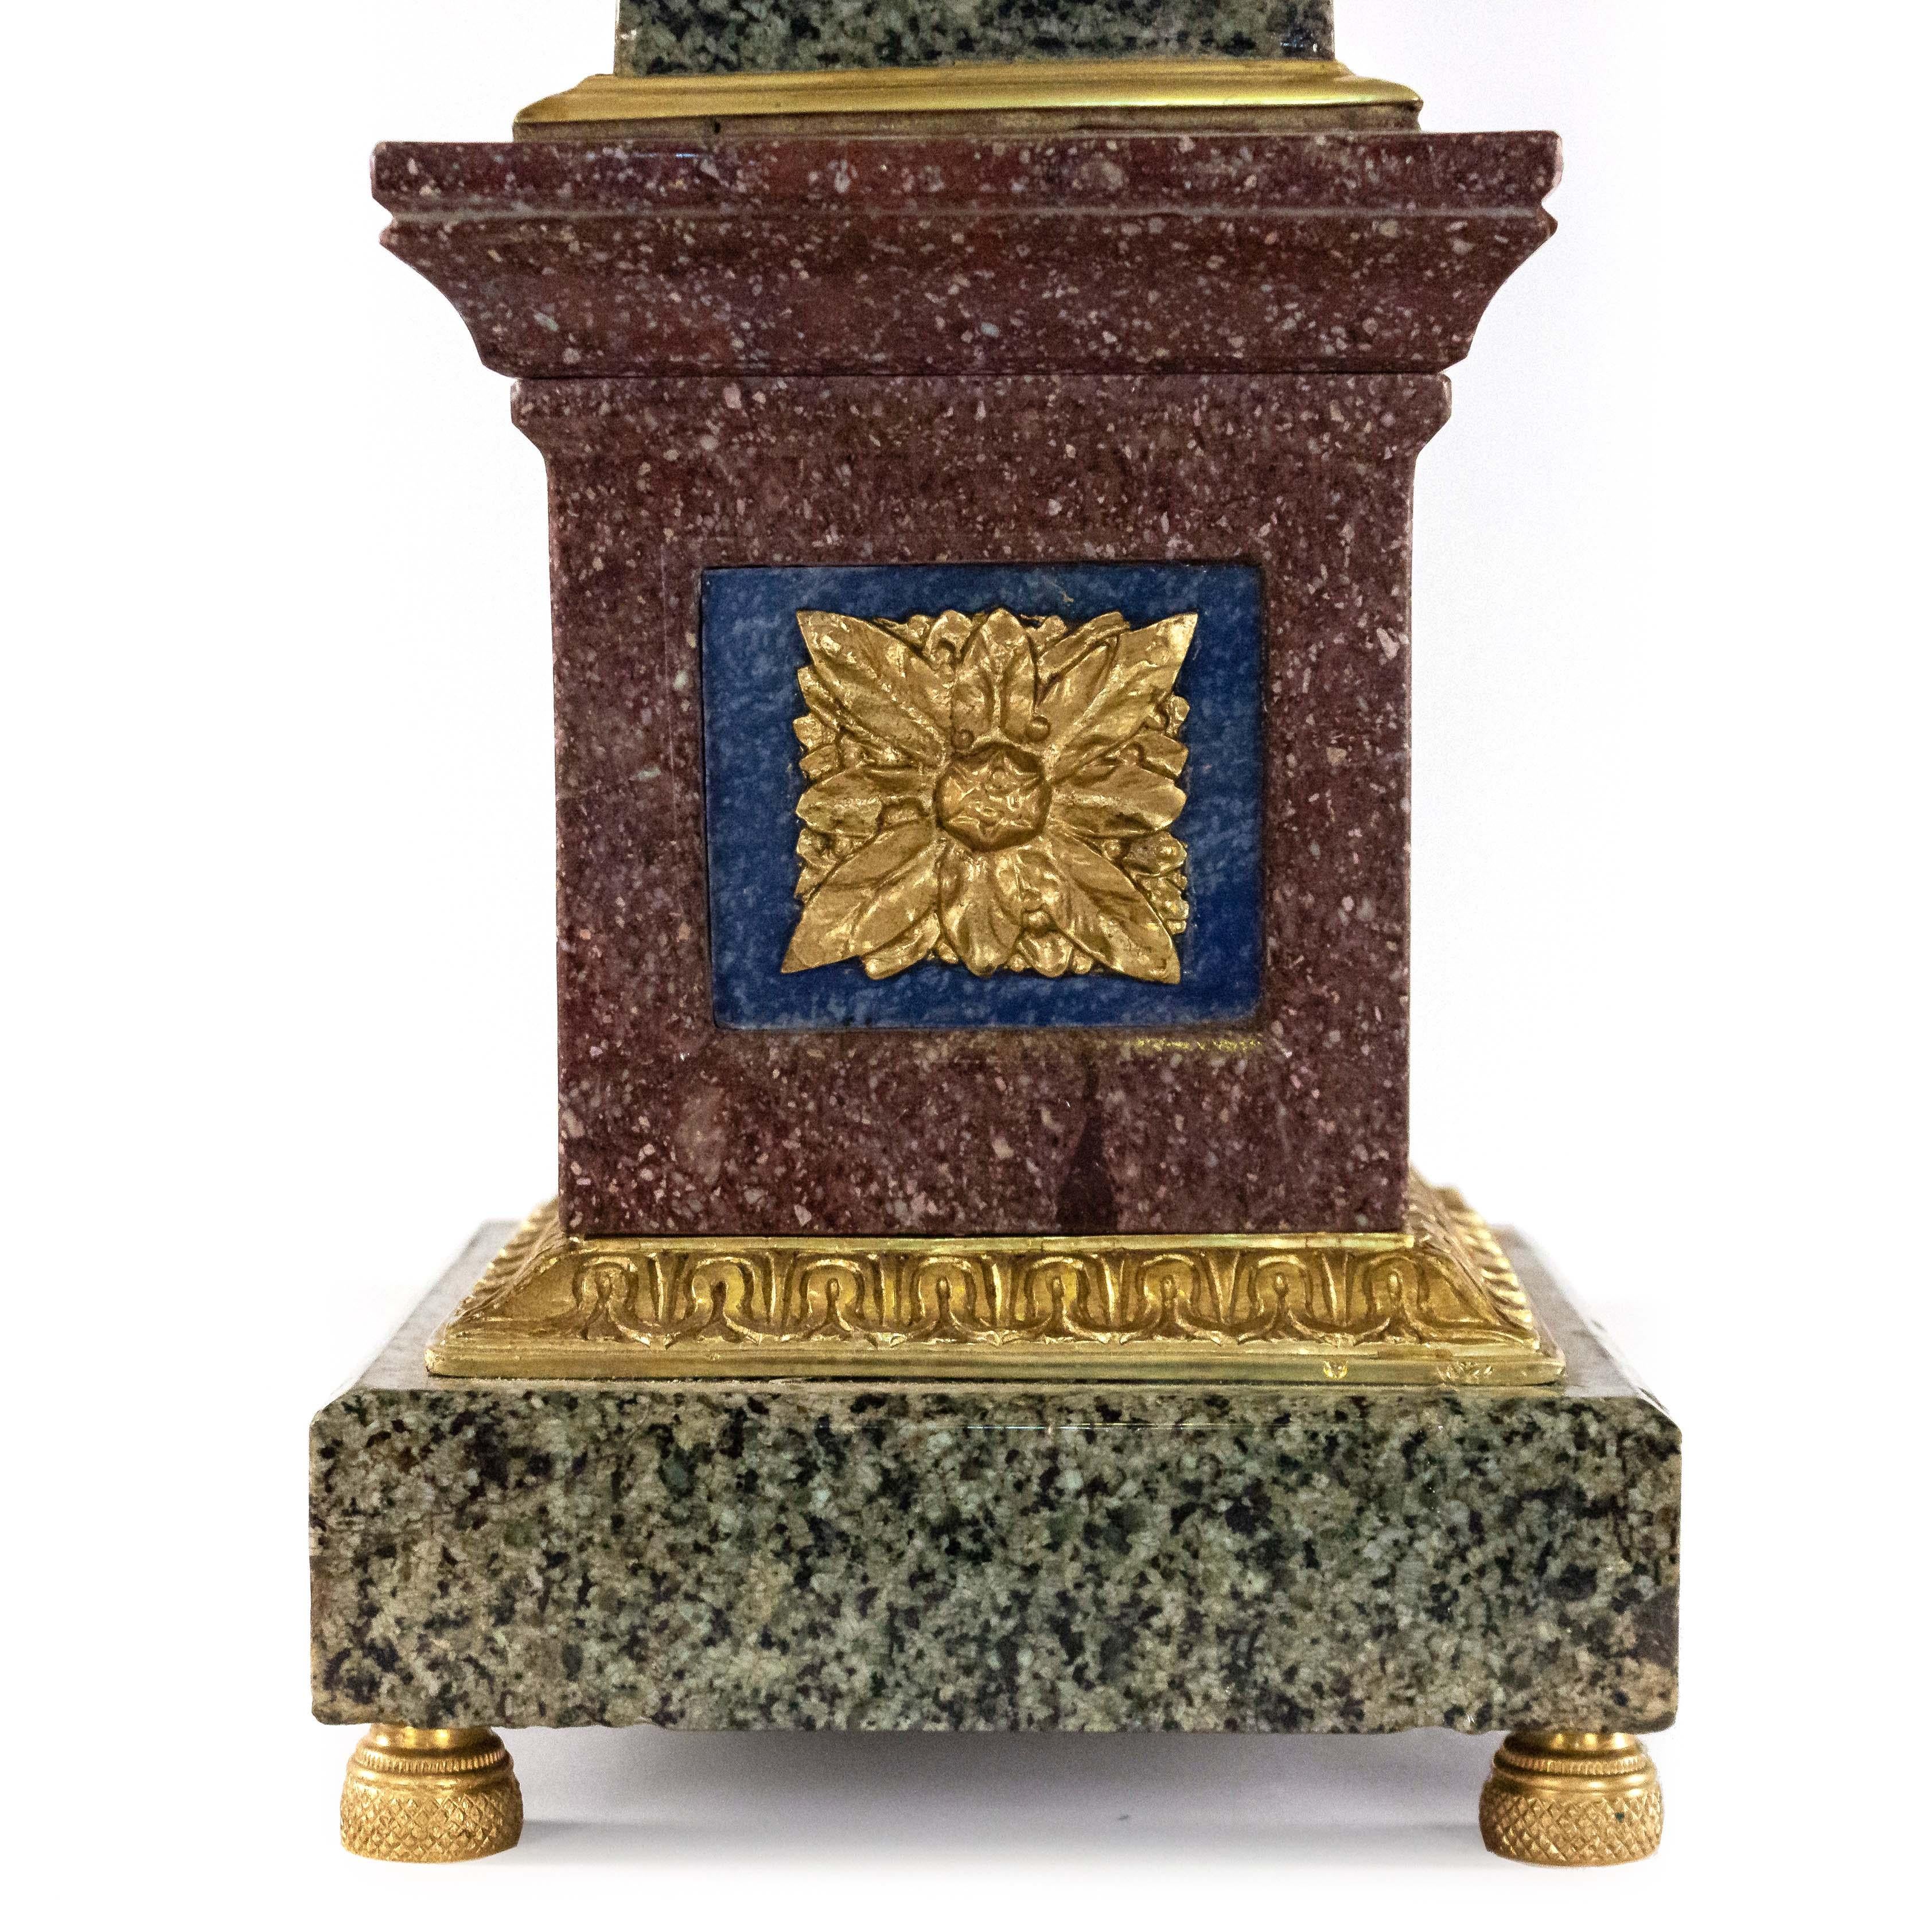 Pair of Italian neoclassic Grand Tour style (19th-20th Century) bronze mounted hard stone obelisks with porphyry bases.